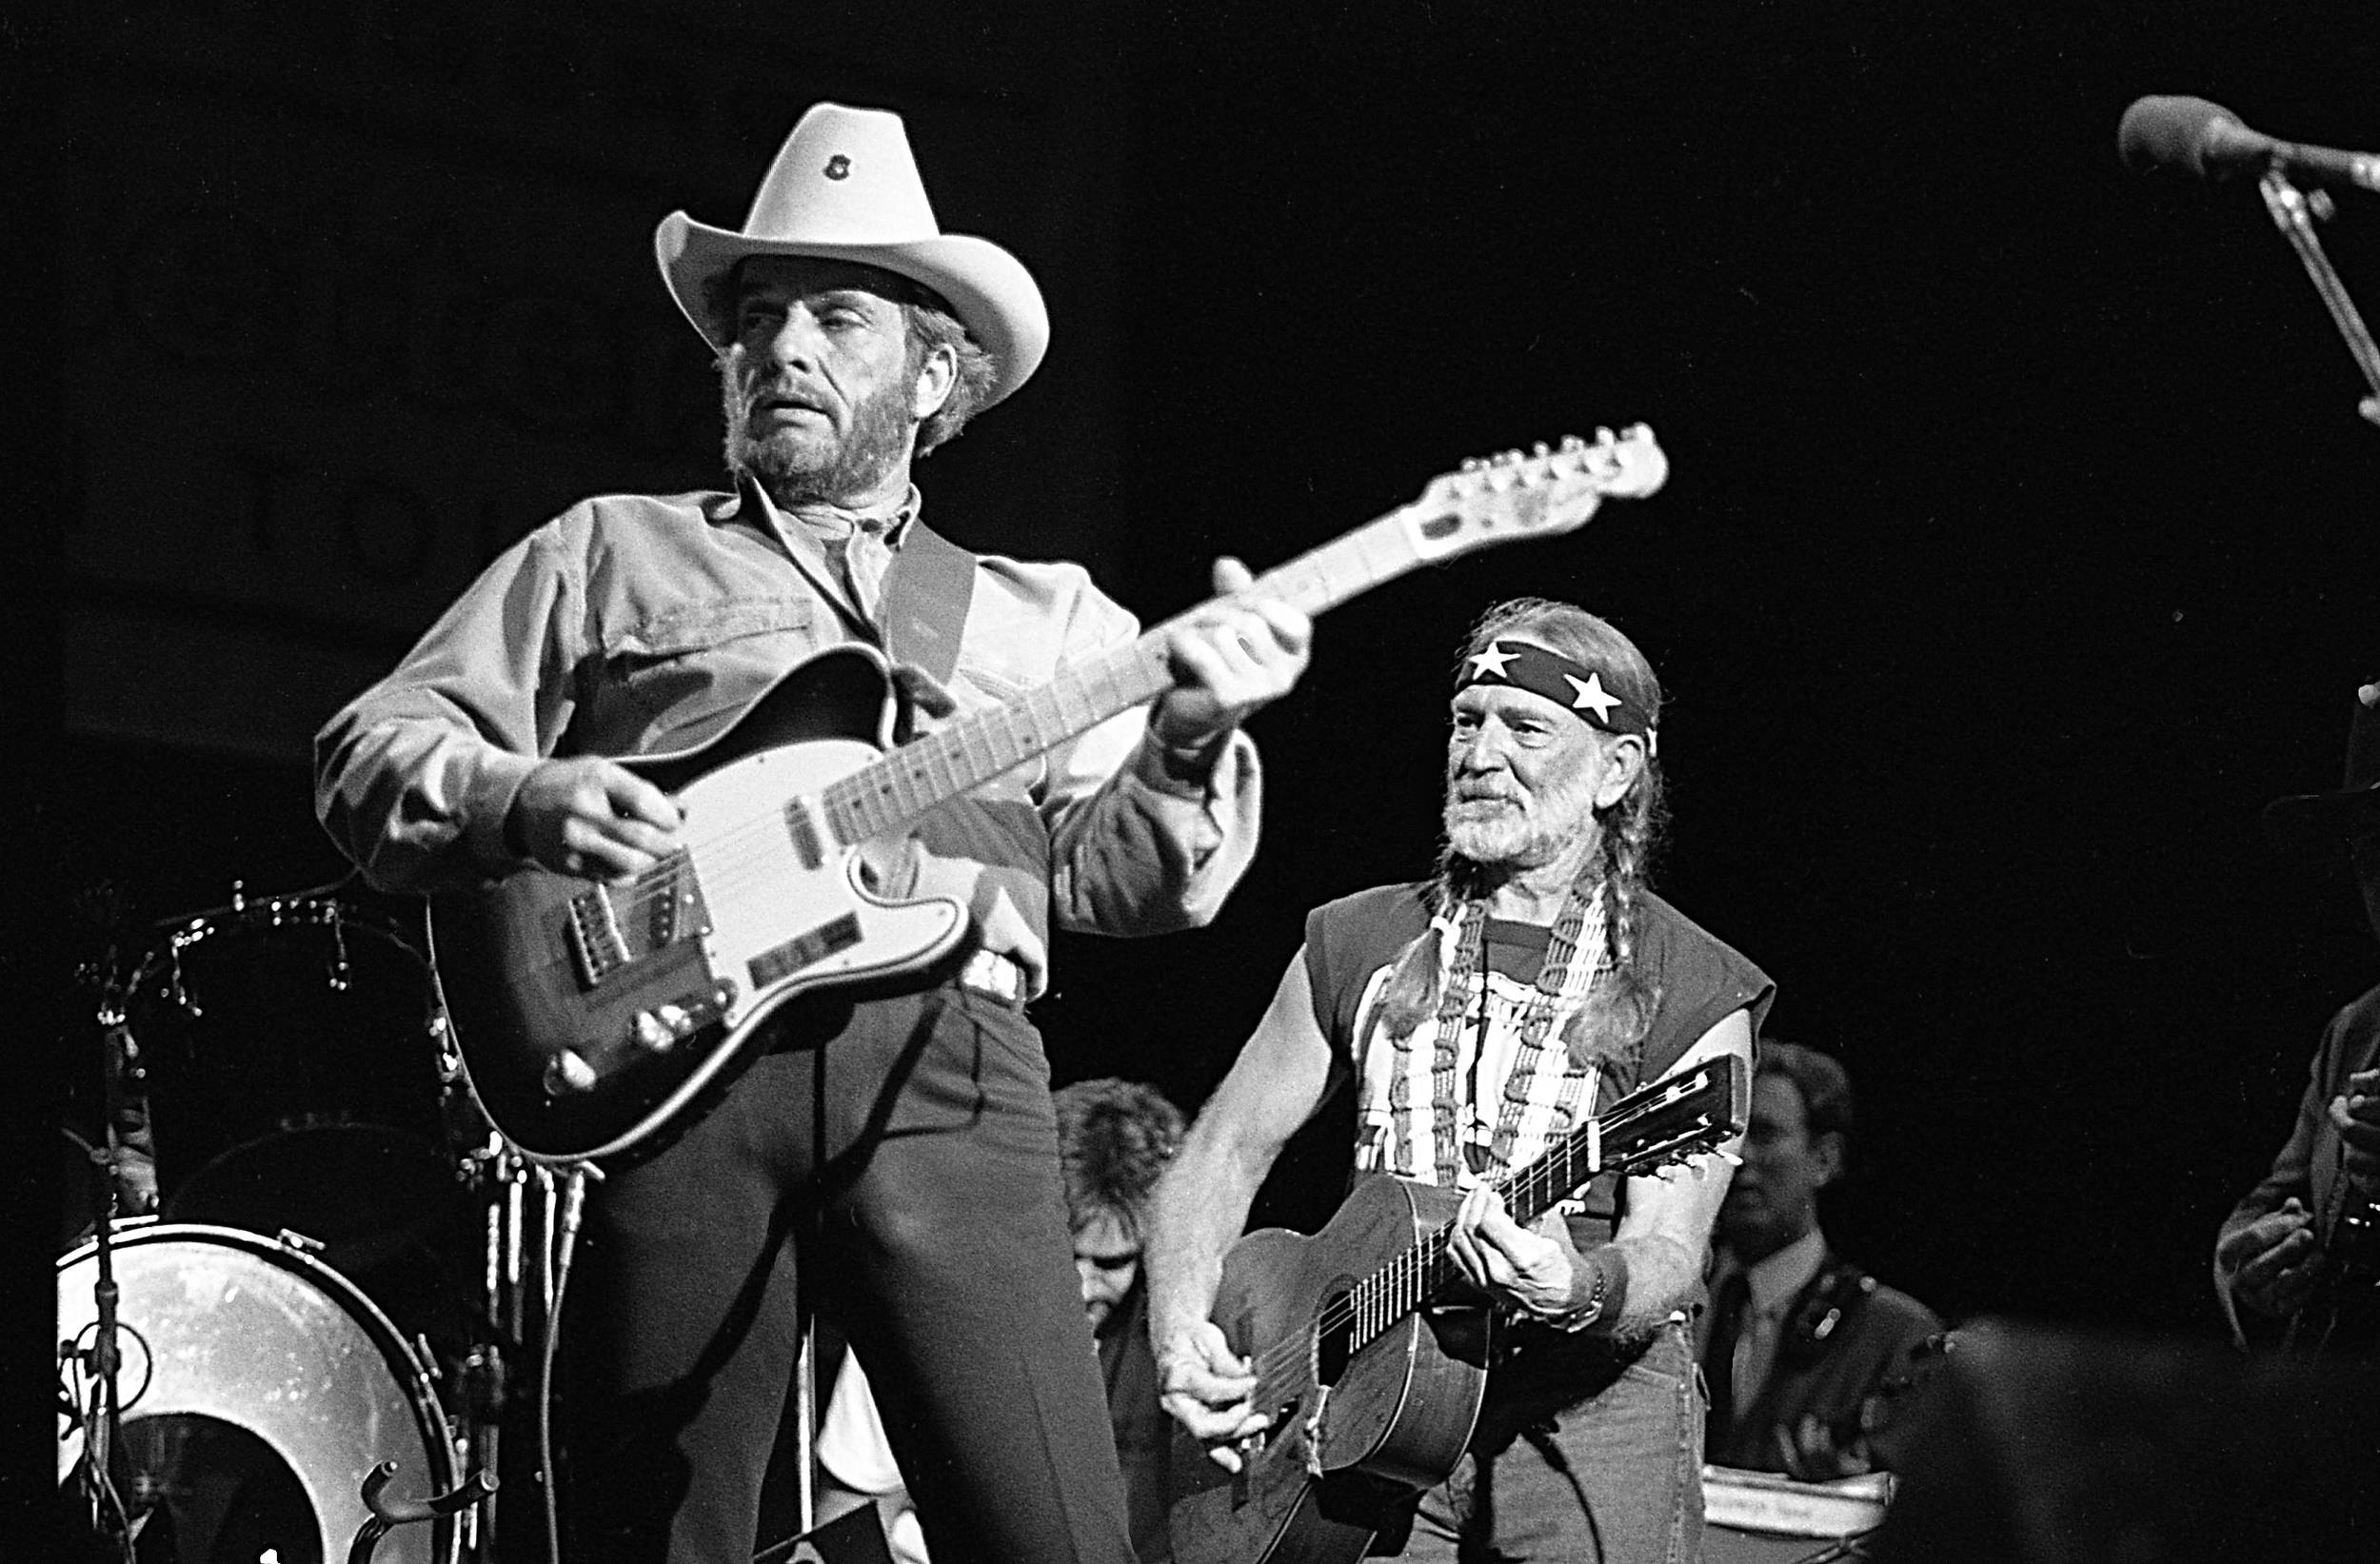 <p>Written and recorded originally by Townes Van Zandt, Merle Haggard and Willie Nelson scored a #1 hit with "Pancho and Lefty" in 1983. It remains one of the genre's finest story songs and still inspires debate among fans about which story actually inspired Van Zandt to write the lyrics. Was it the life of Pancho Villa, or something more philosophical? </p><p><a href='https://www.msn.com/en-us/community/channel/vid-cj9pqbr0vn9in2b6ddcd8sfgpfq6x6utp44fssrv6mc2gtybw0us'>Follow us on MSN to see more of our exclusive entertainment content.</a></p>